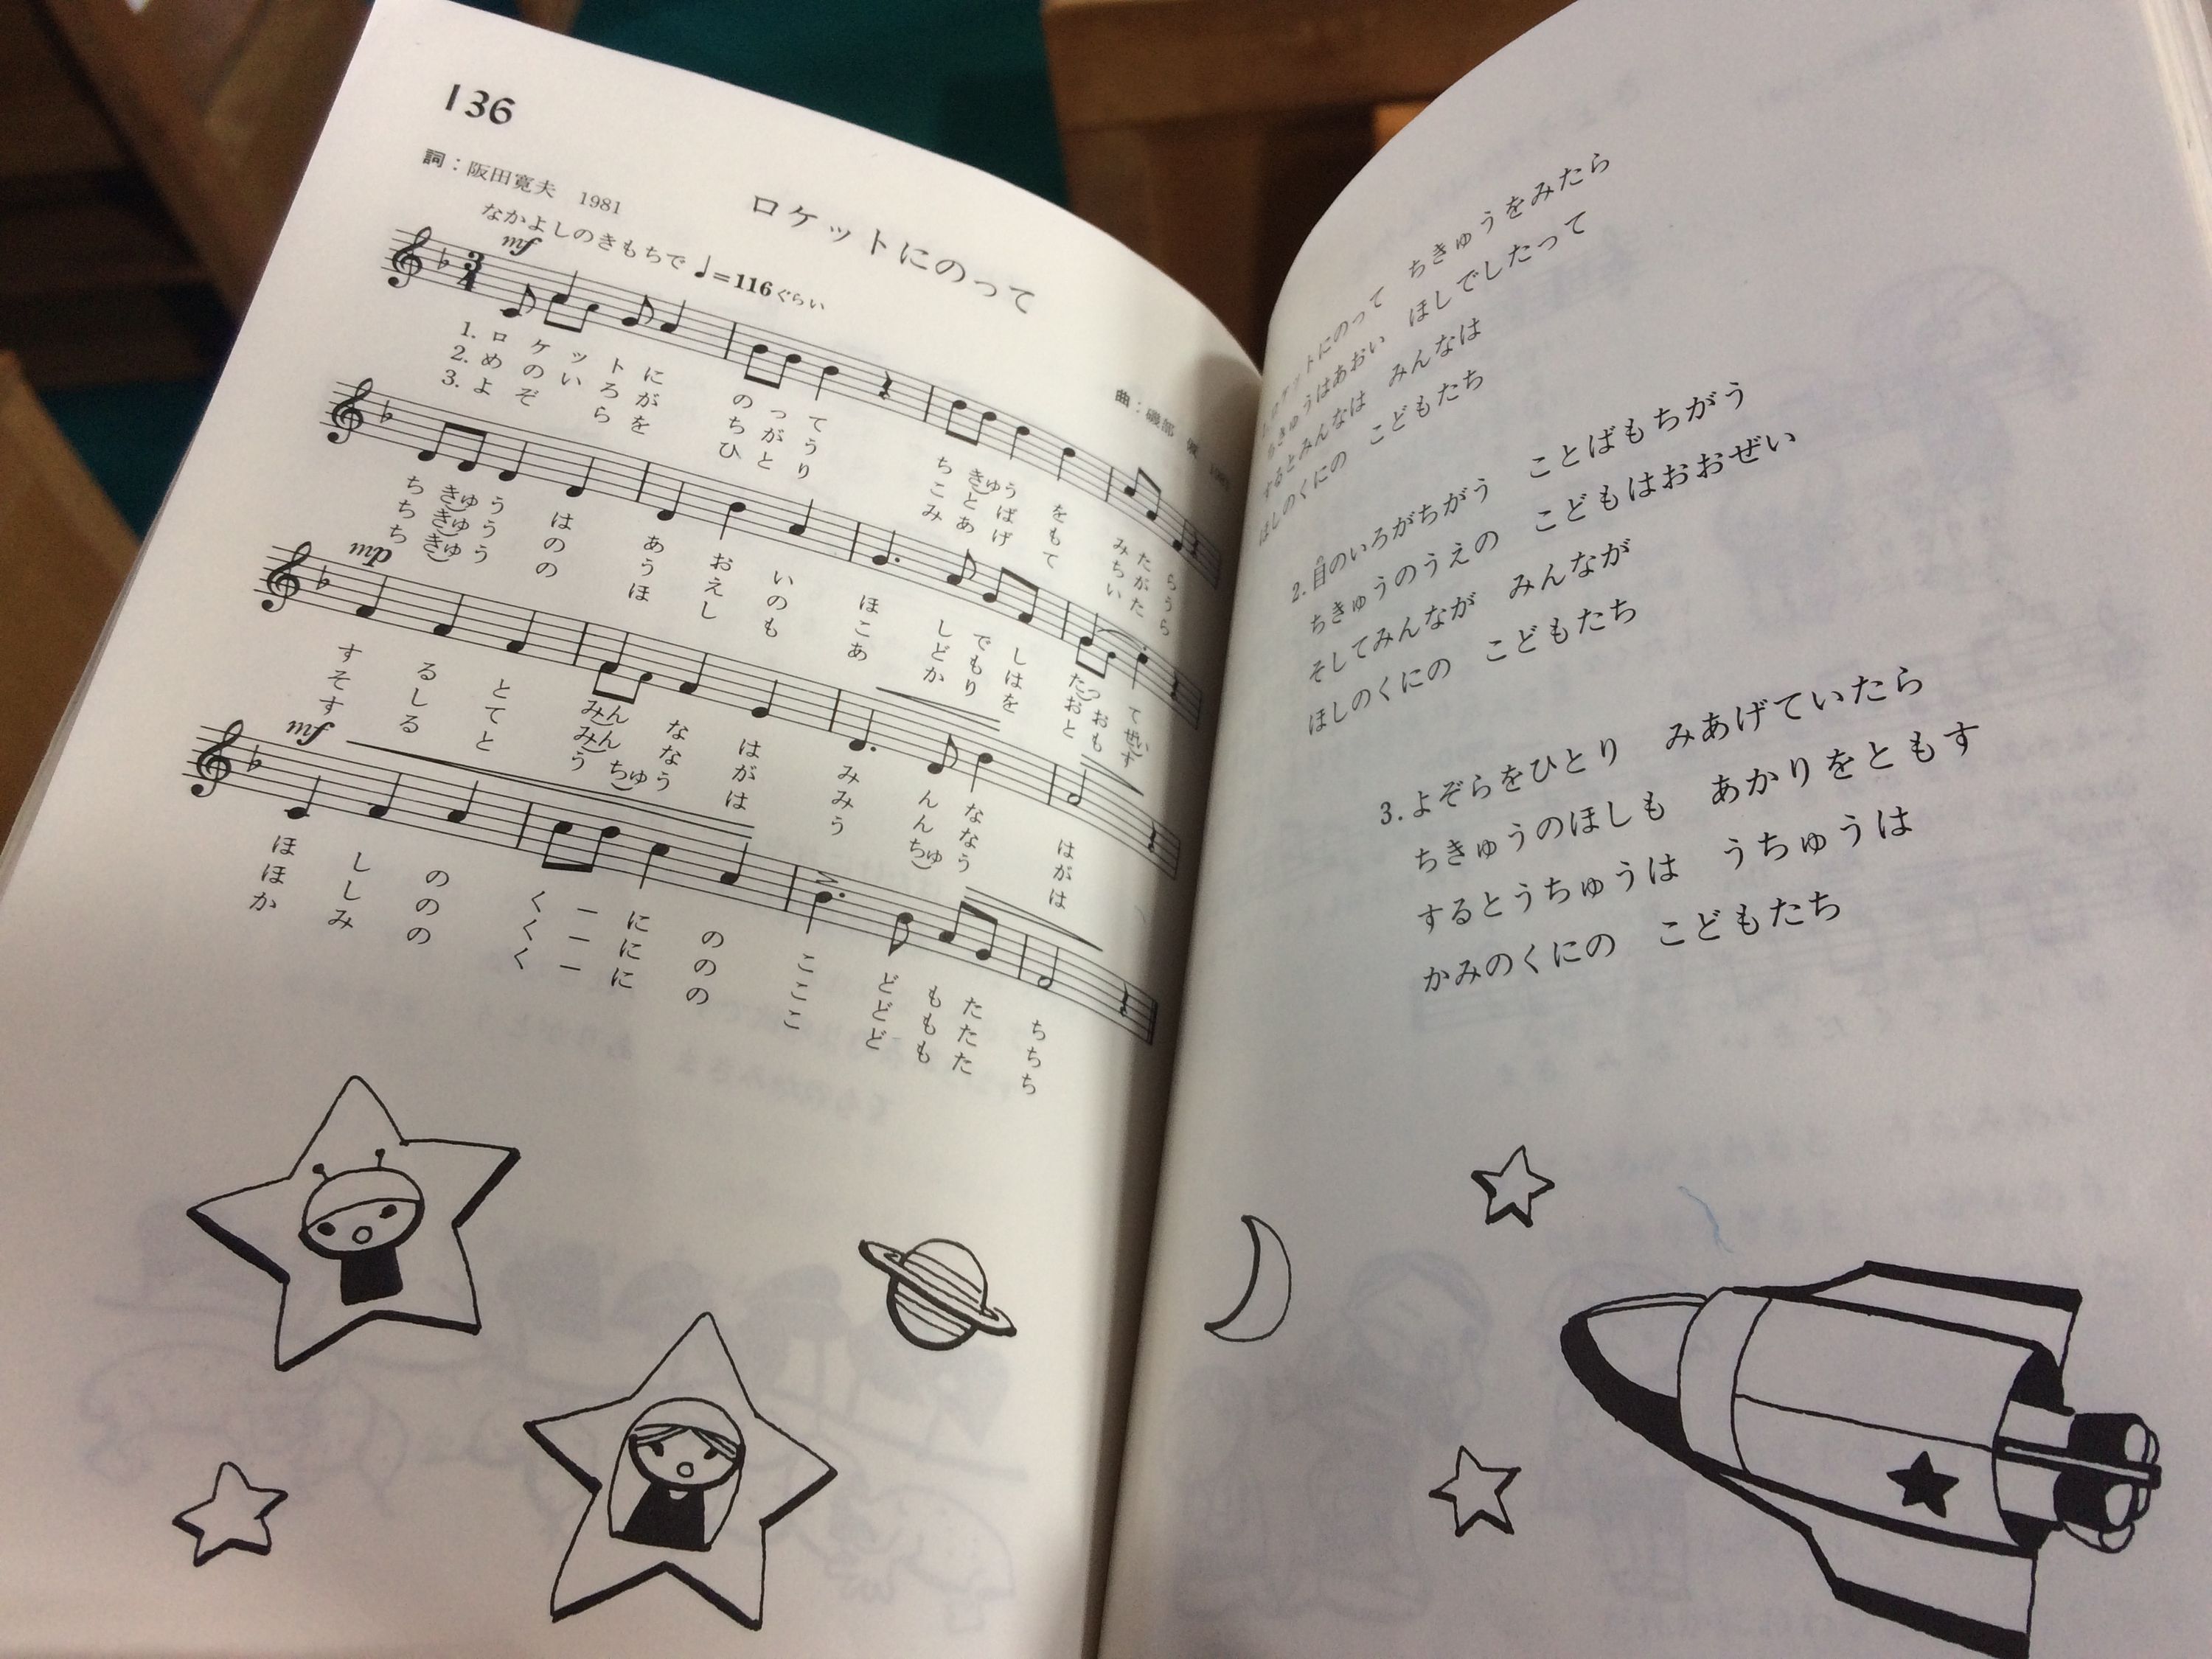 A page in a psalm book for children decorated with stars and a spaceship.